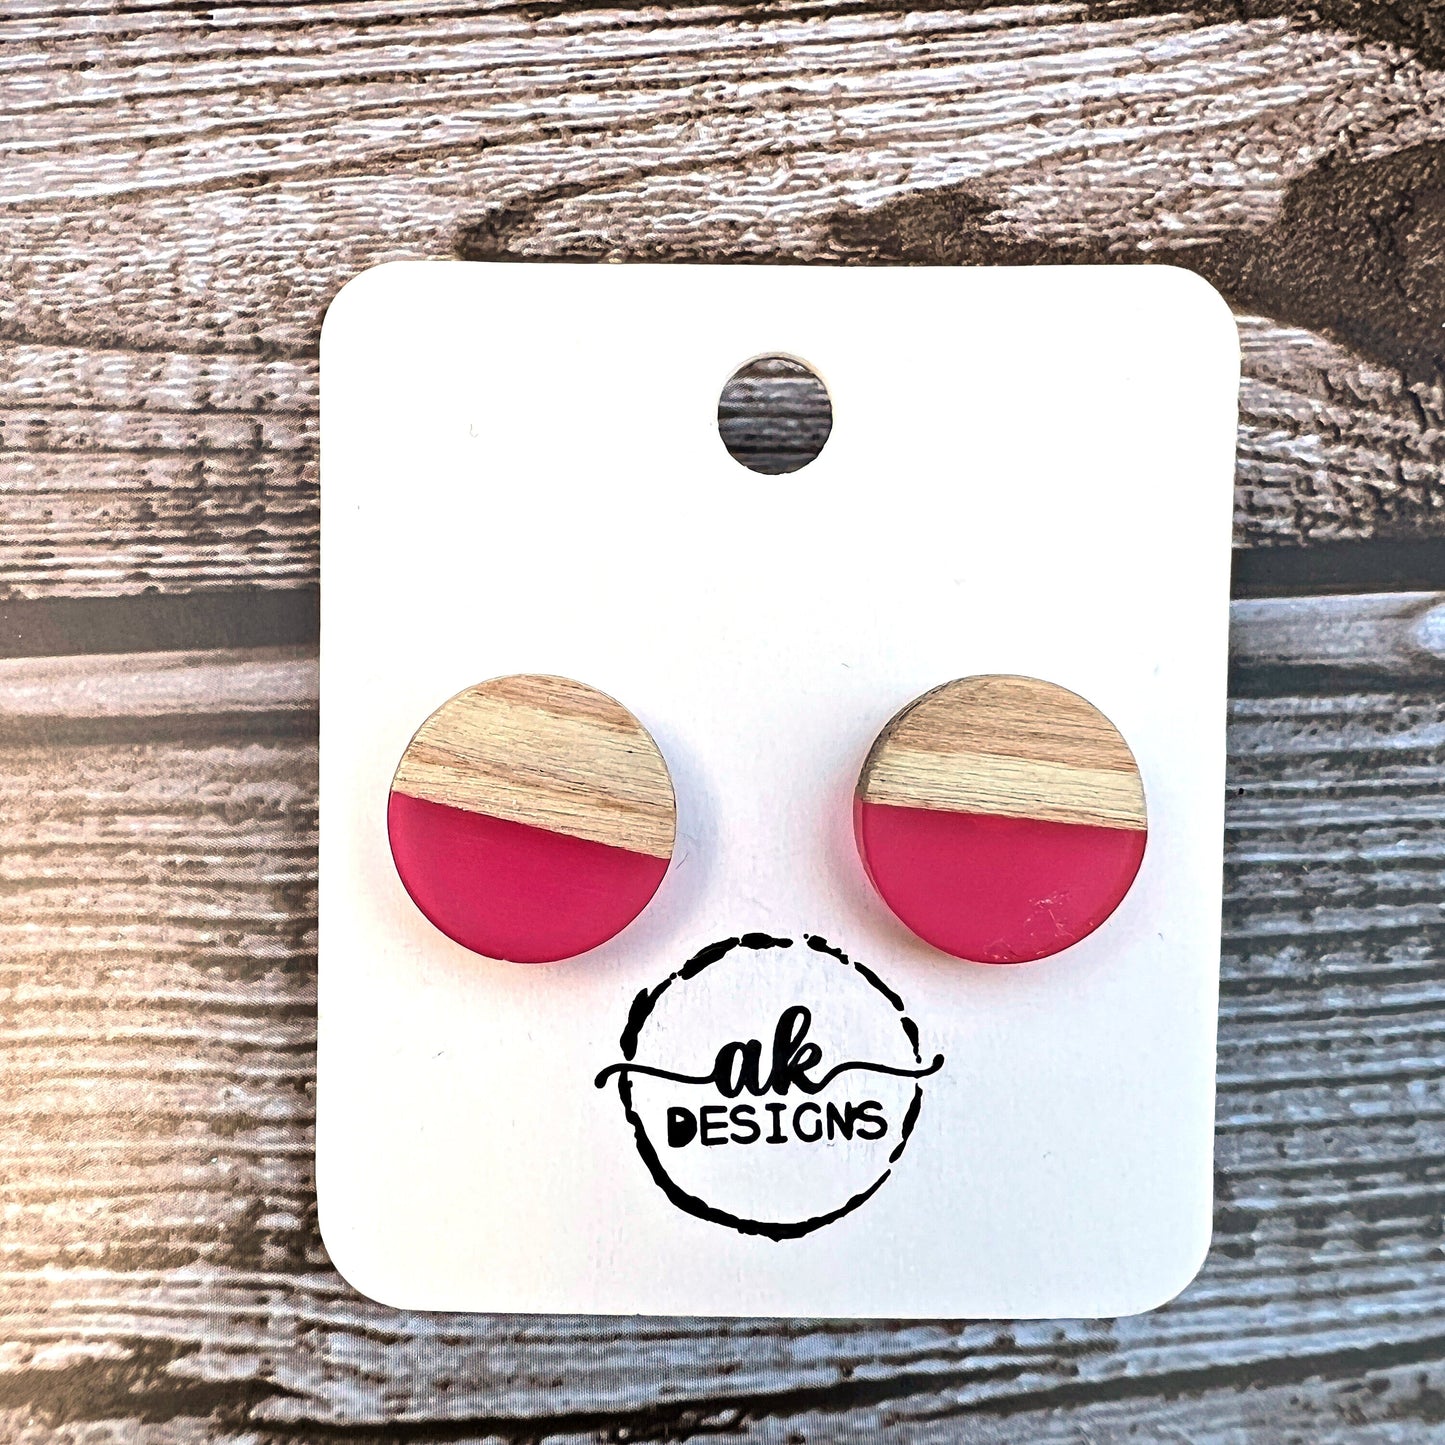 Hypoallergenic Translucent Round Resin and Wood Stud Earrings Orange Pink Blue White Mint - Clearance